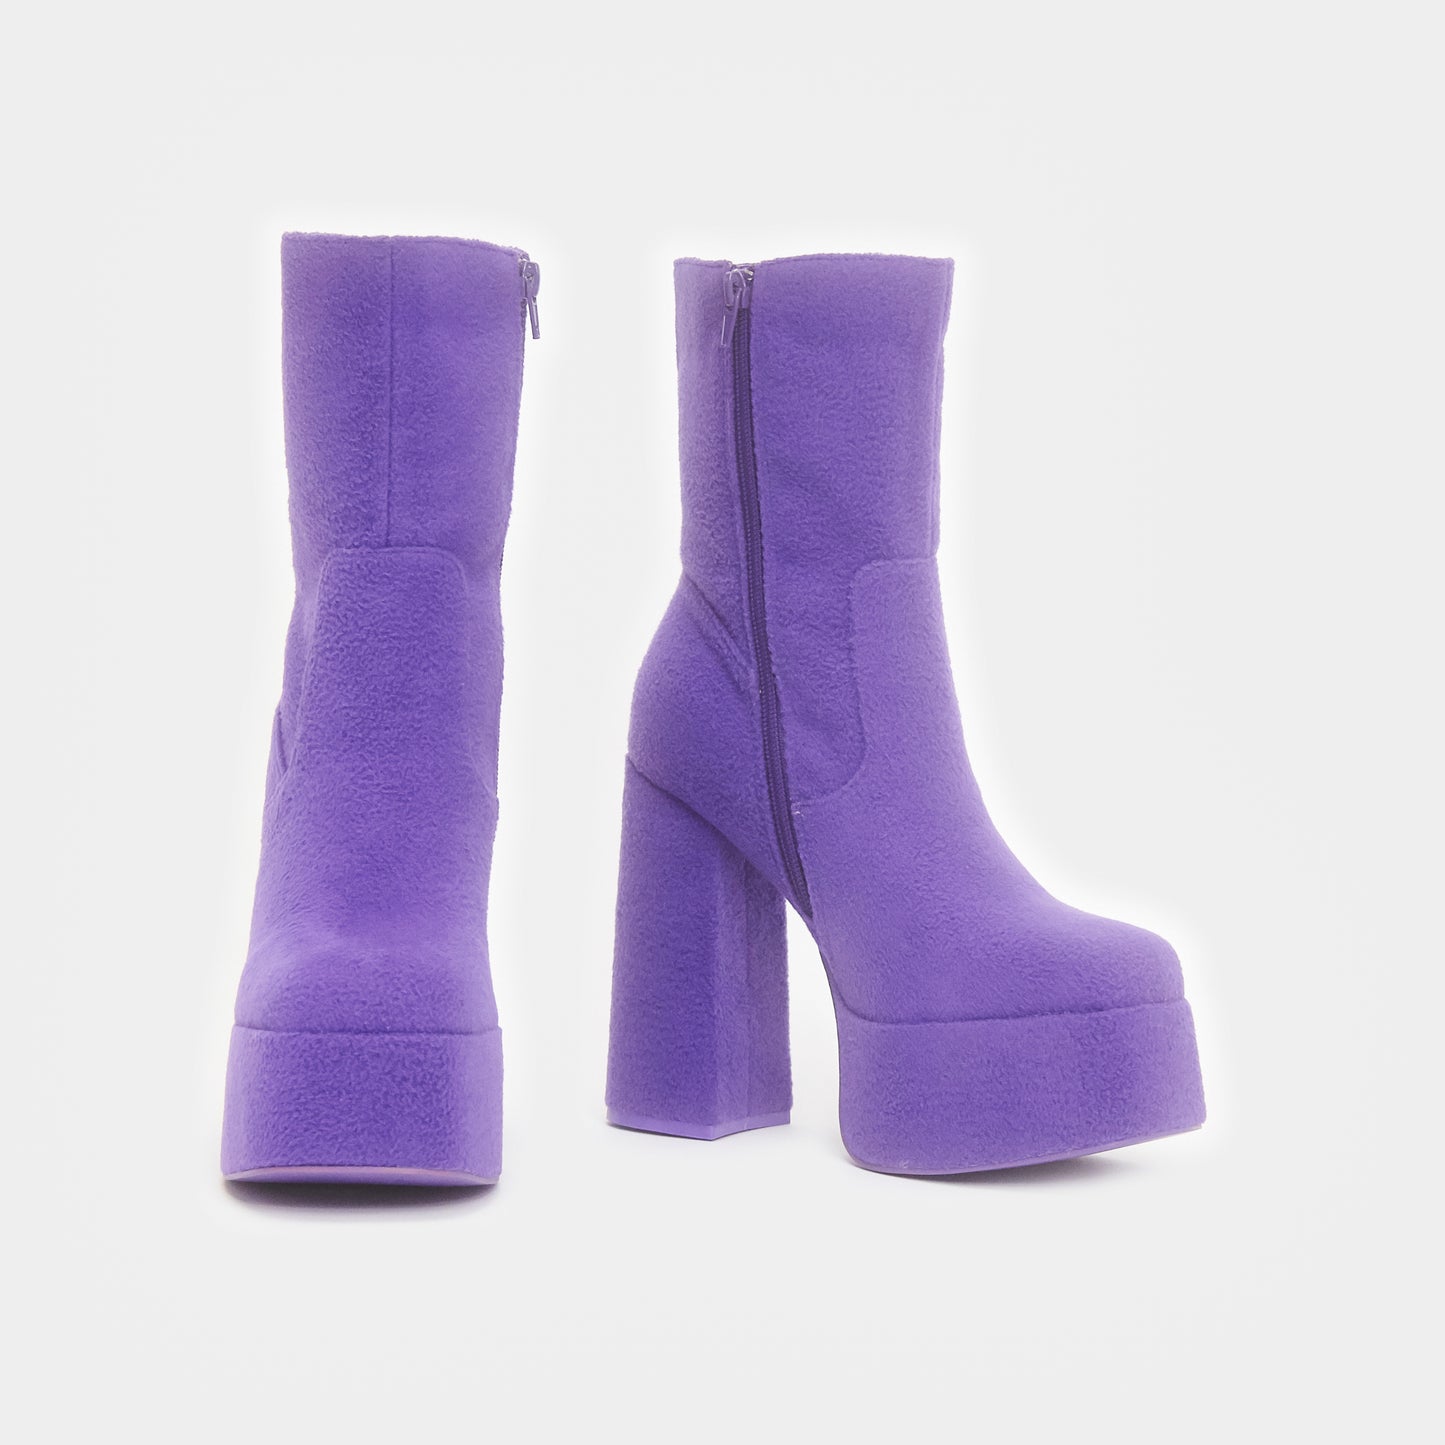 Tinky Winky Fluffy Platform Boots - Ankle Boots - KOI Footwear - Purple - Front View